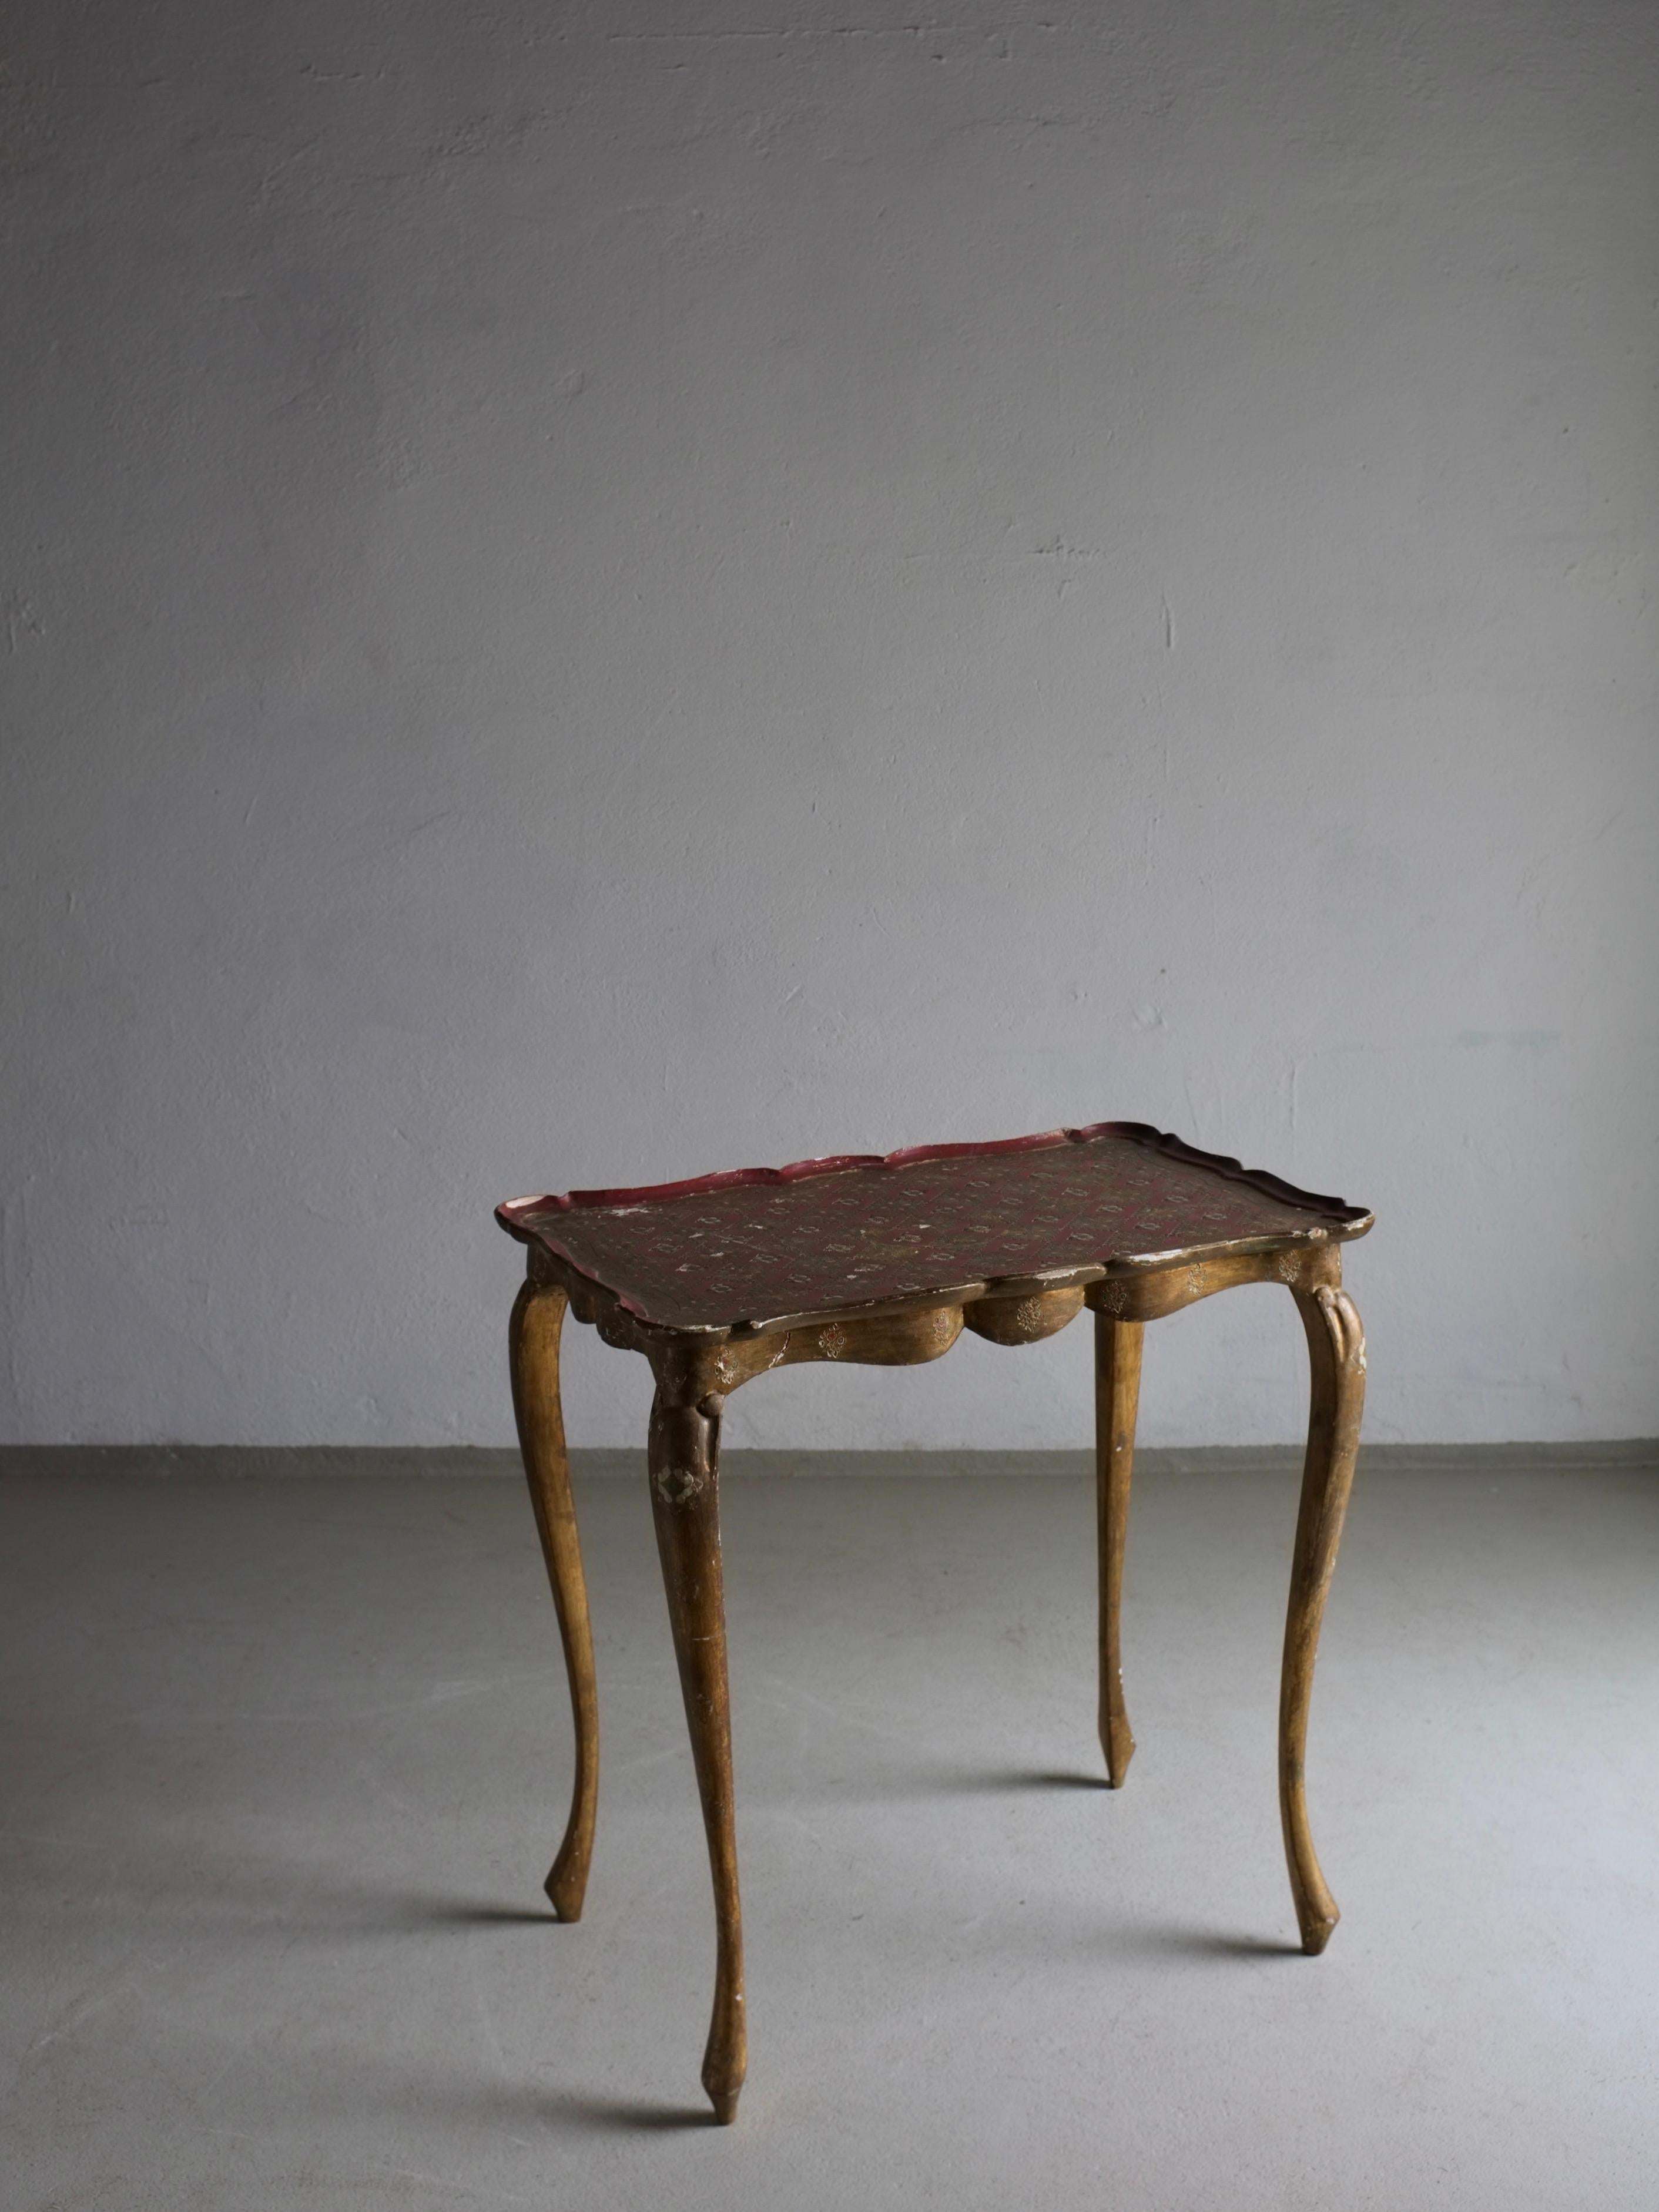 Vintage carved hand-painted side table, gilt wood finish with burgundy red.

Additional information:
Country of manufacture: Italy
Period: 1950s
Dimensions: W 57 cm x D 37 cm x H 59 cm
Condition: Good vintage condition (check the photos)